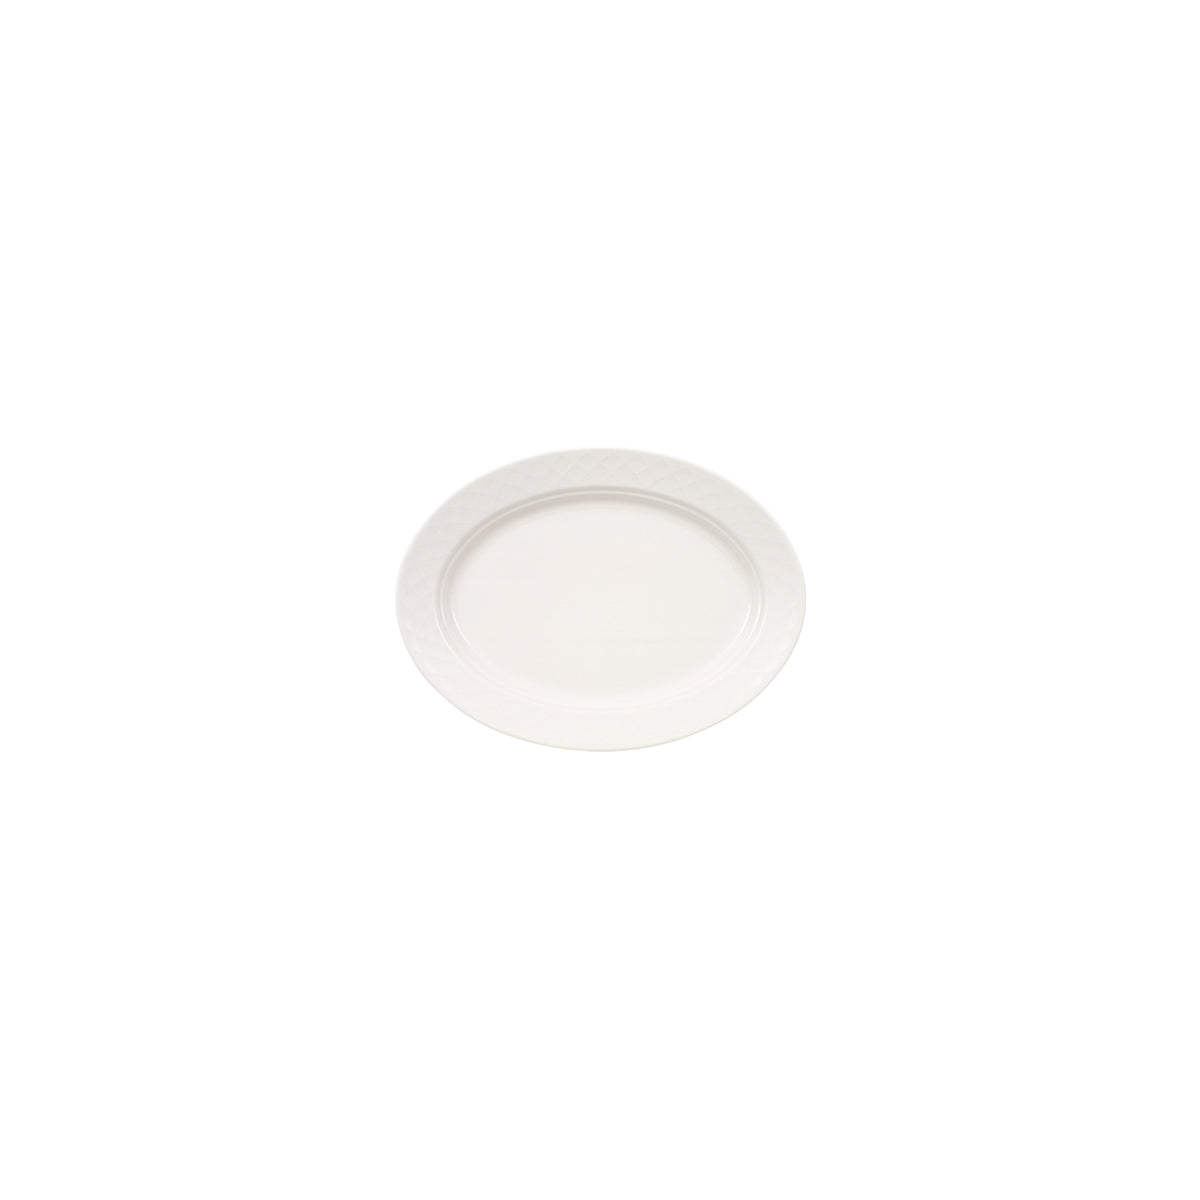 VB16-2238-3570 Villeroy And Boch Villeroy And Boch Bella White Oval Plate Wide Rim 210x170mm Tomkin Australia Hospitality Supplies